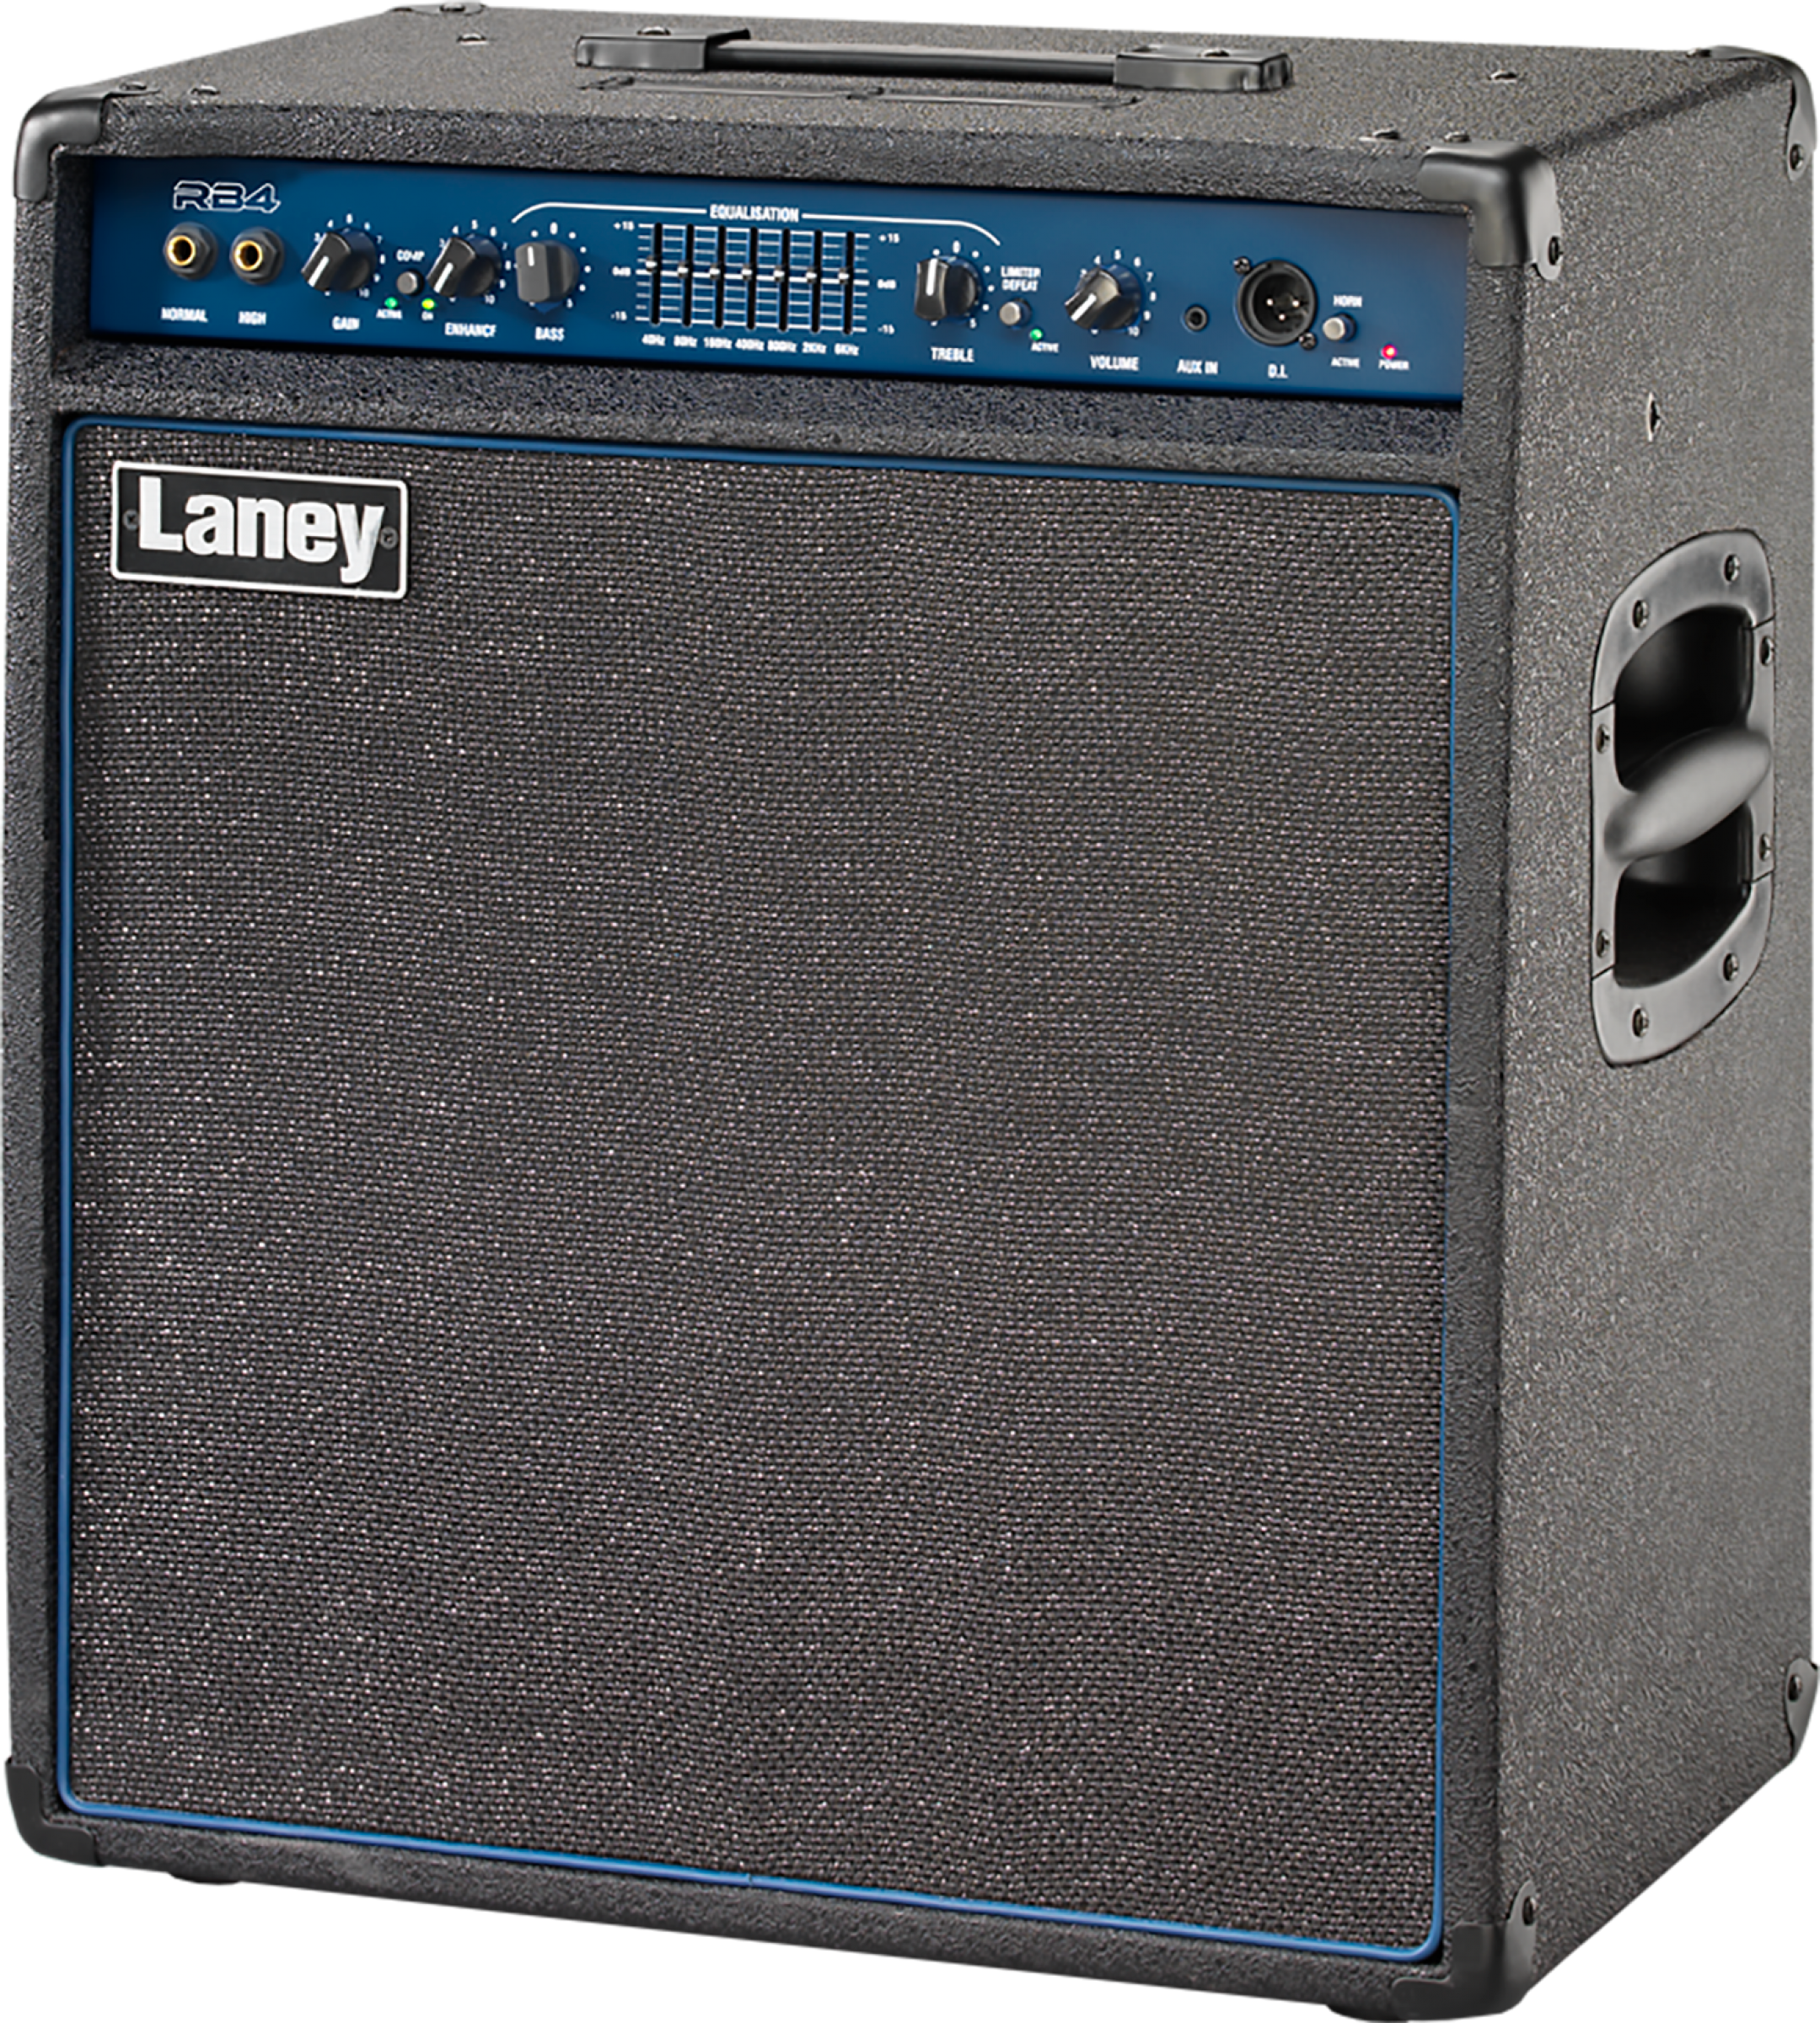 Laney Rb4 165w 1x15 - Combo voor basses - Variation 2